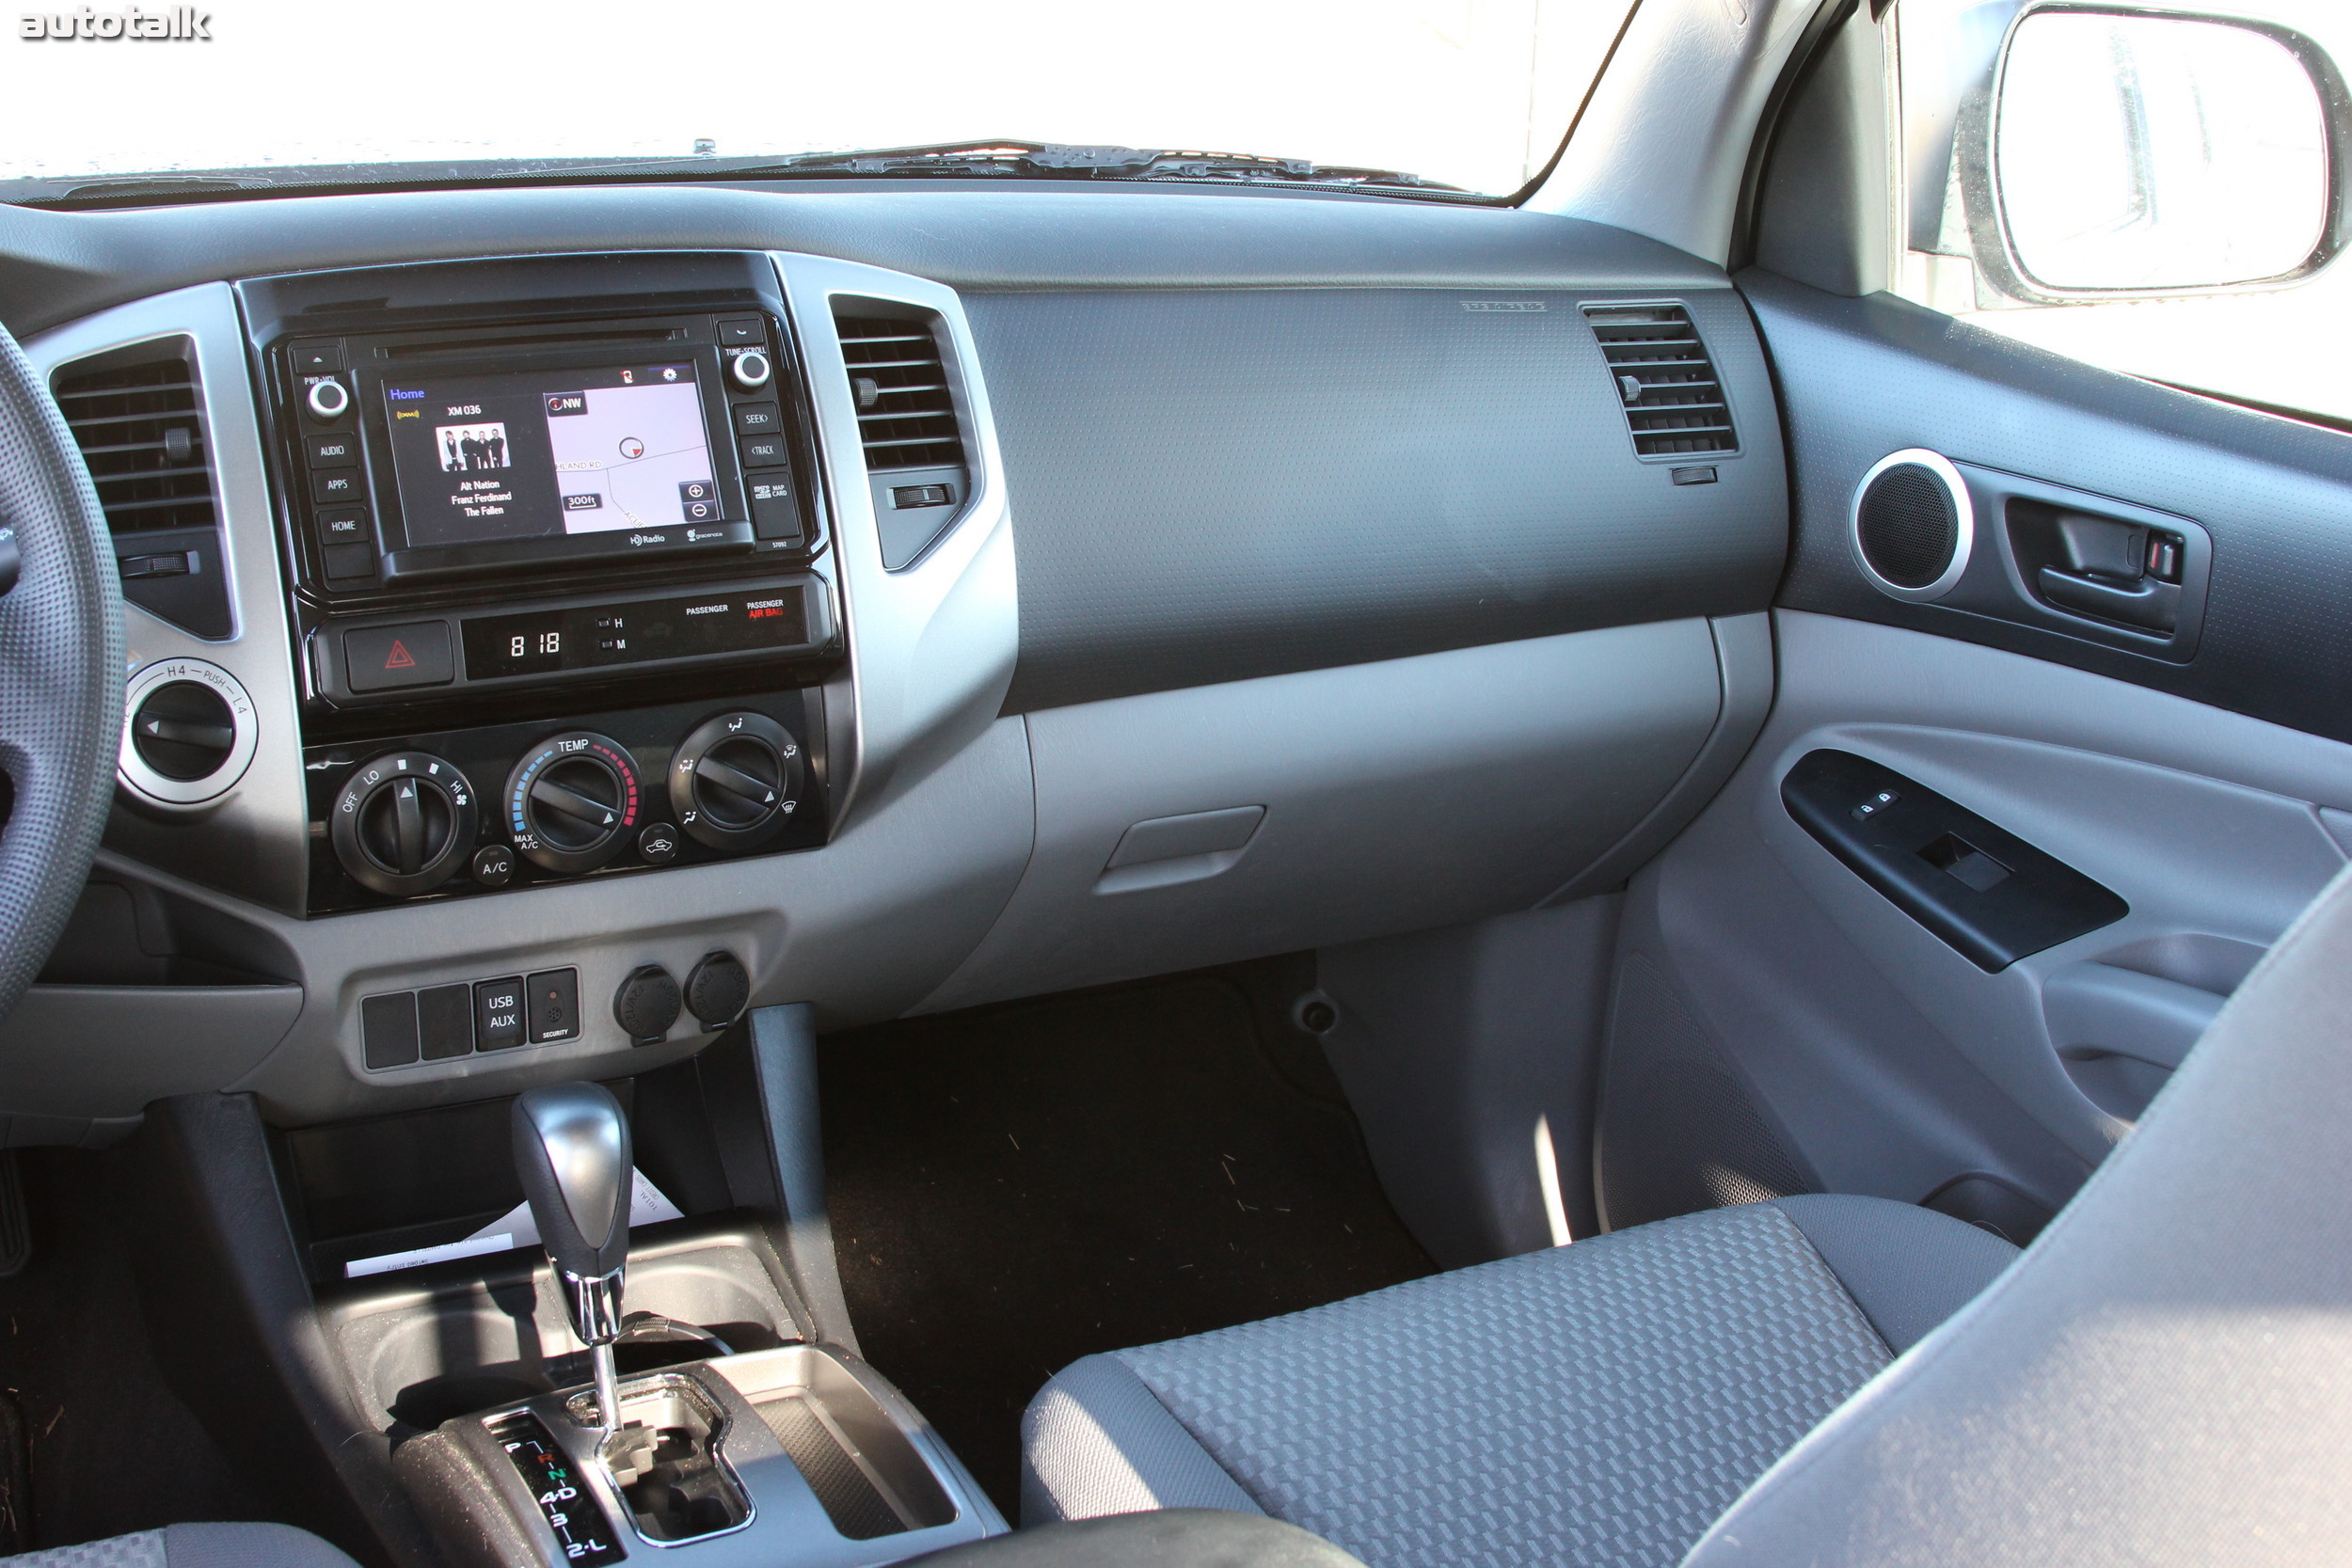 2014 Toyota Tacoma Review